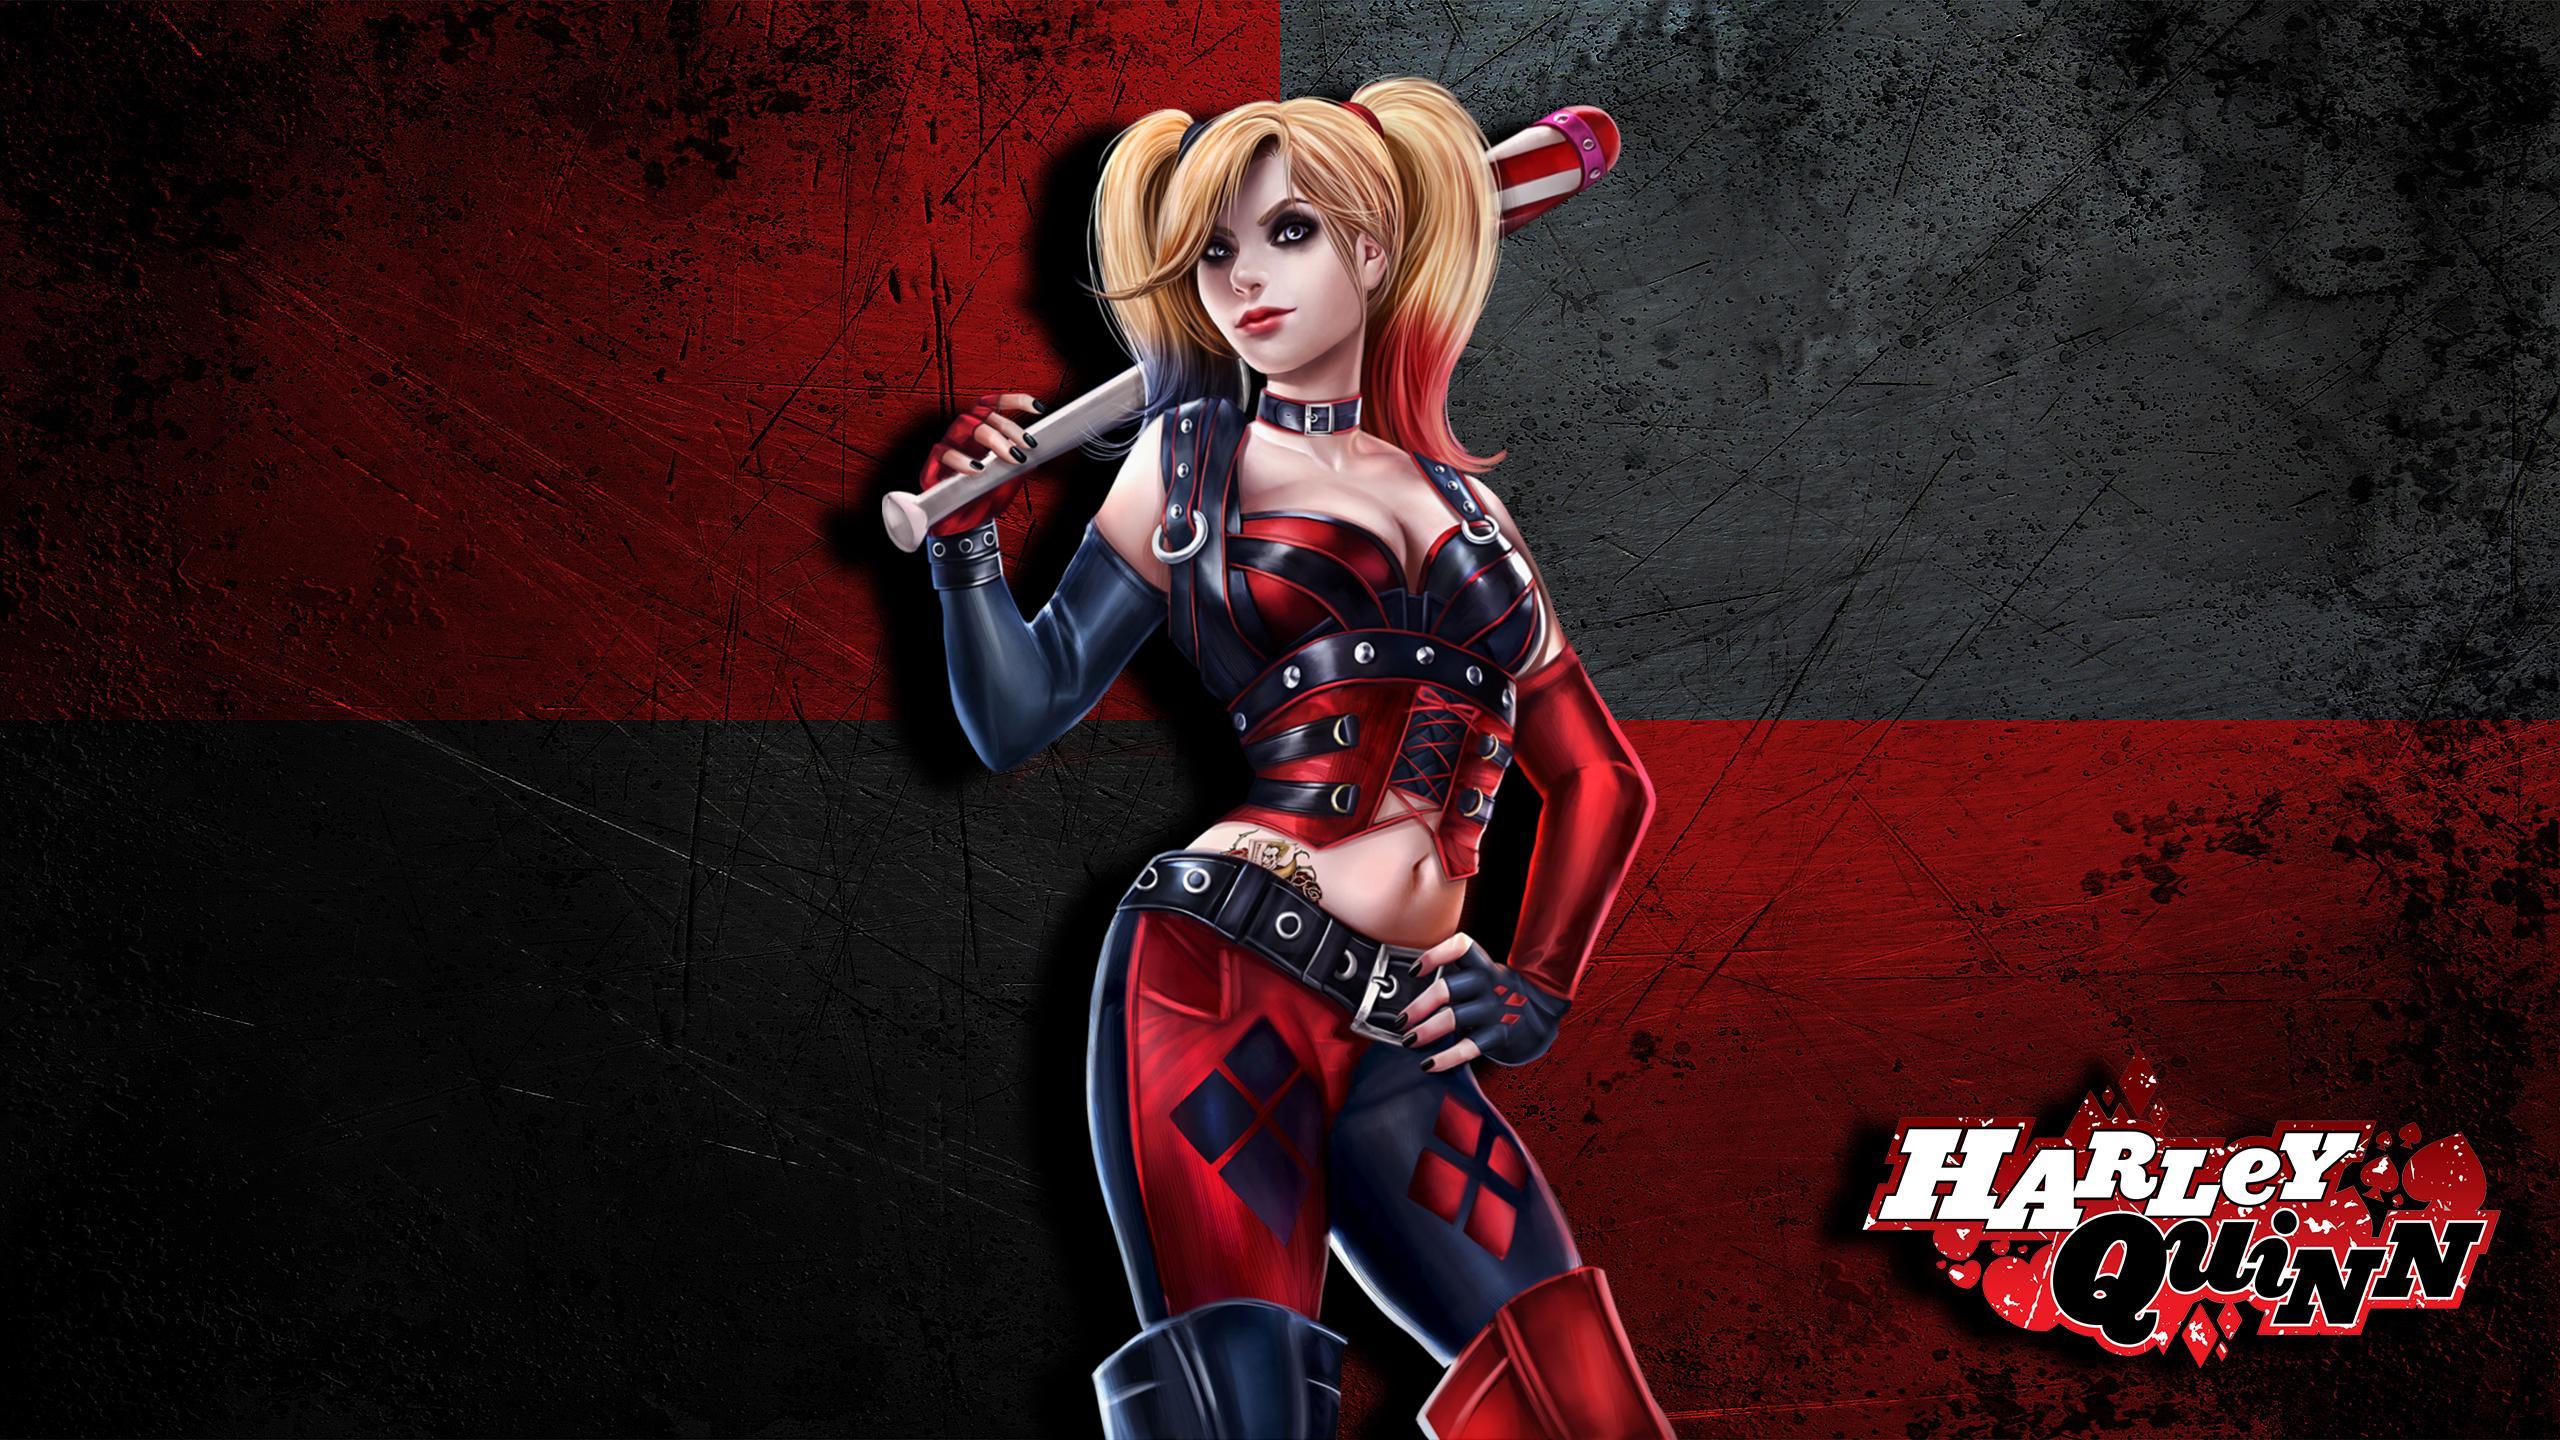 Harley Quinn wallpaper I made and thought I would share =